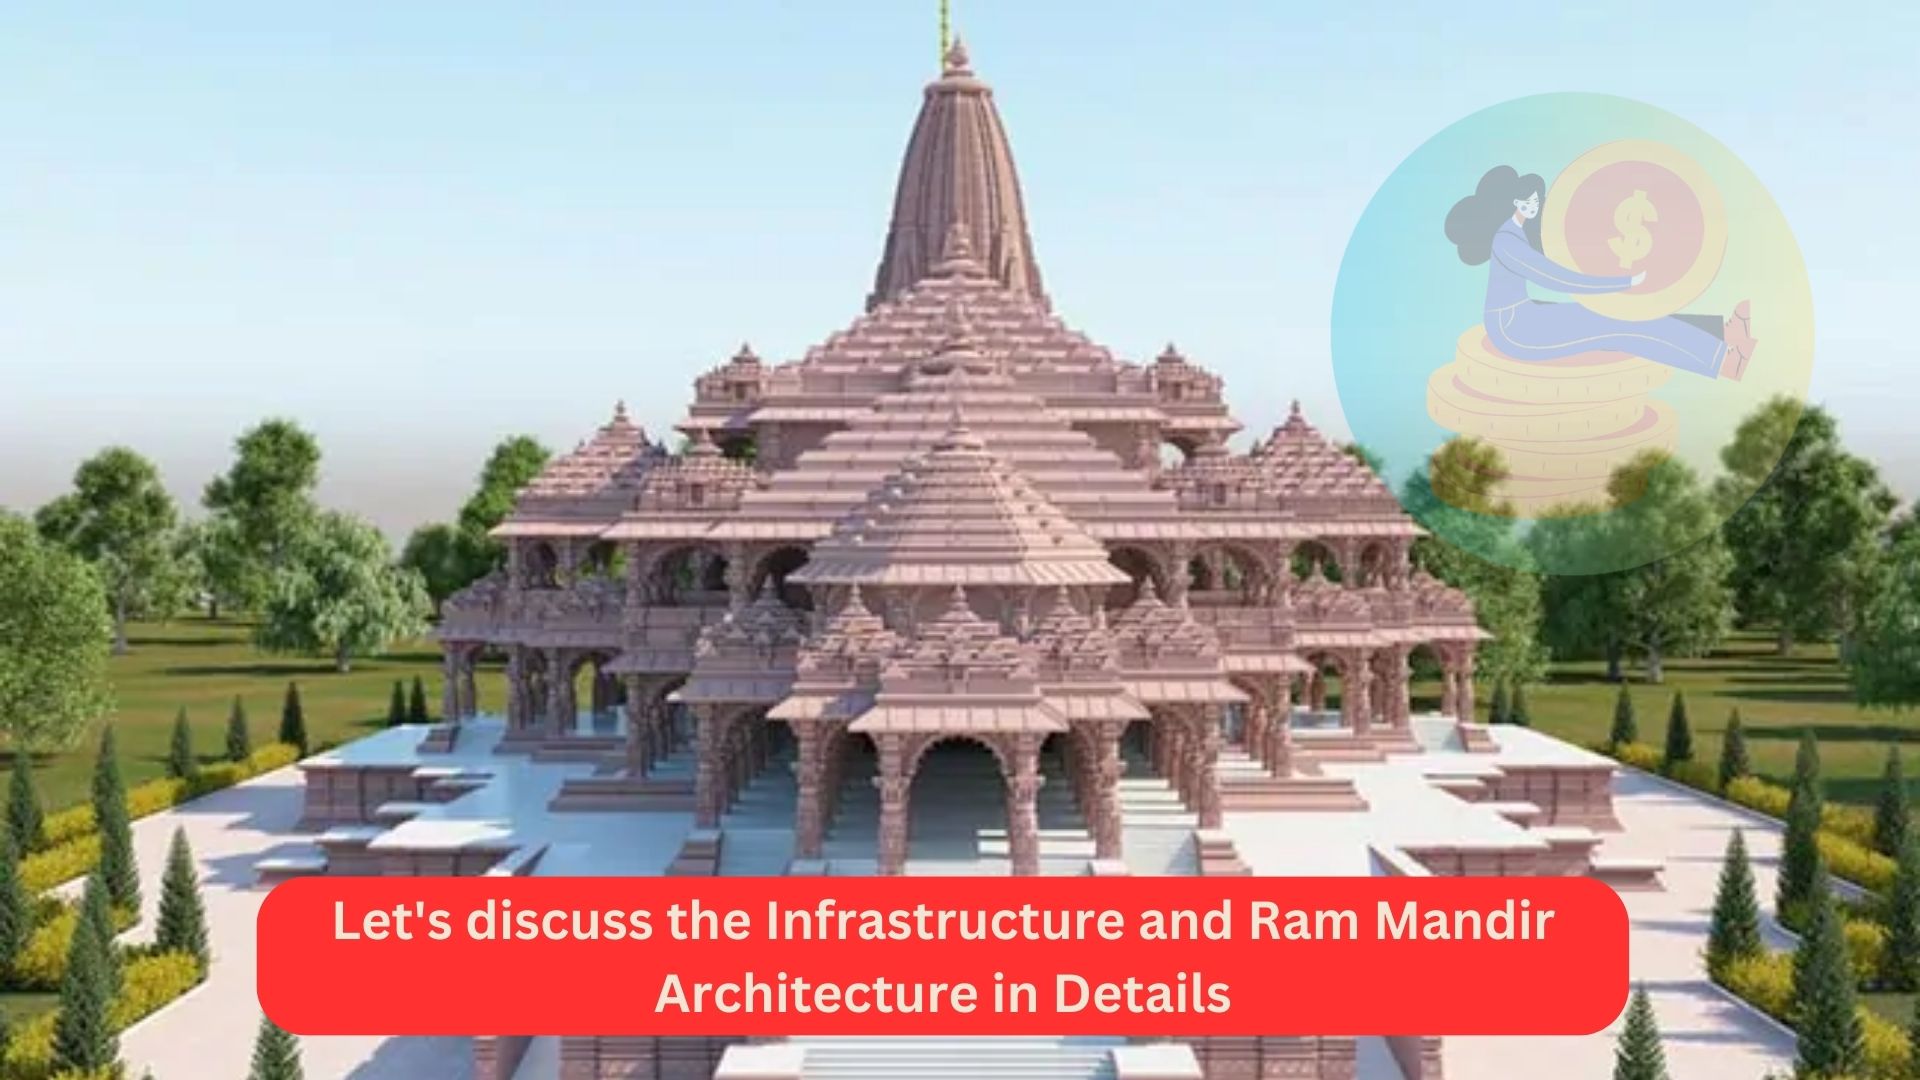 Let's discuss the Infrastructure and Ram Mandir Architecture in Details